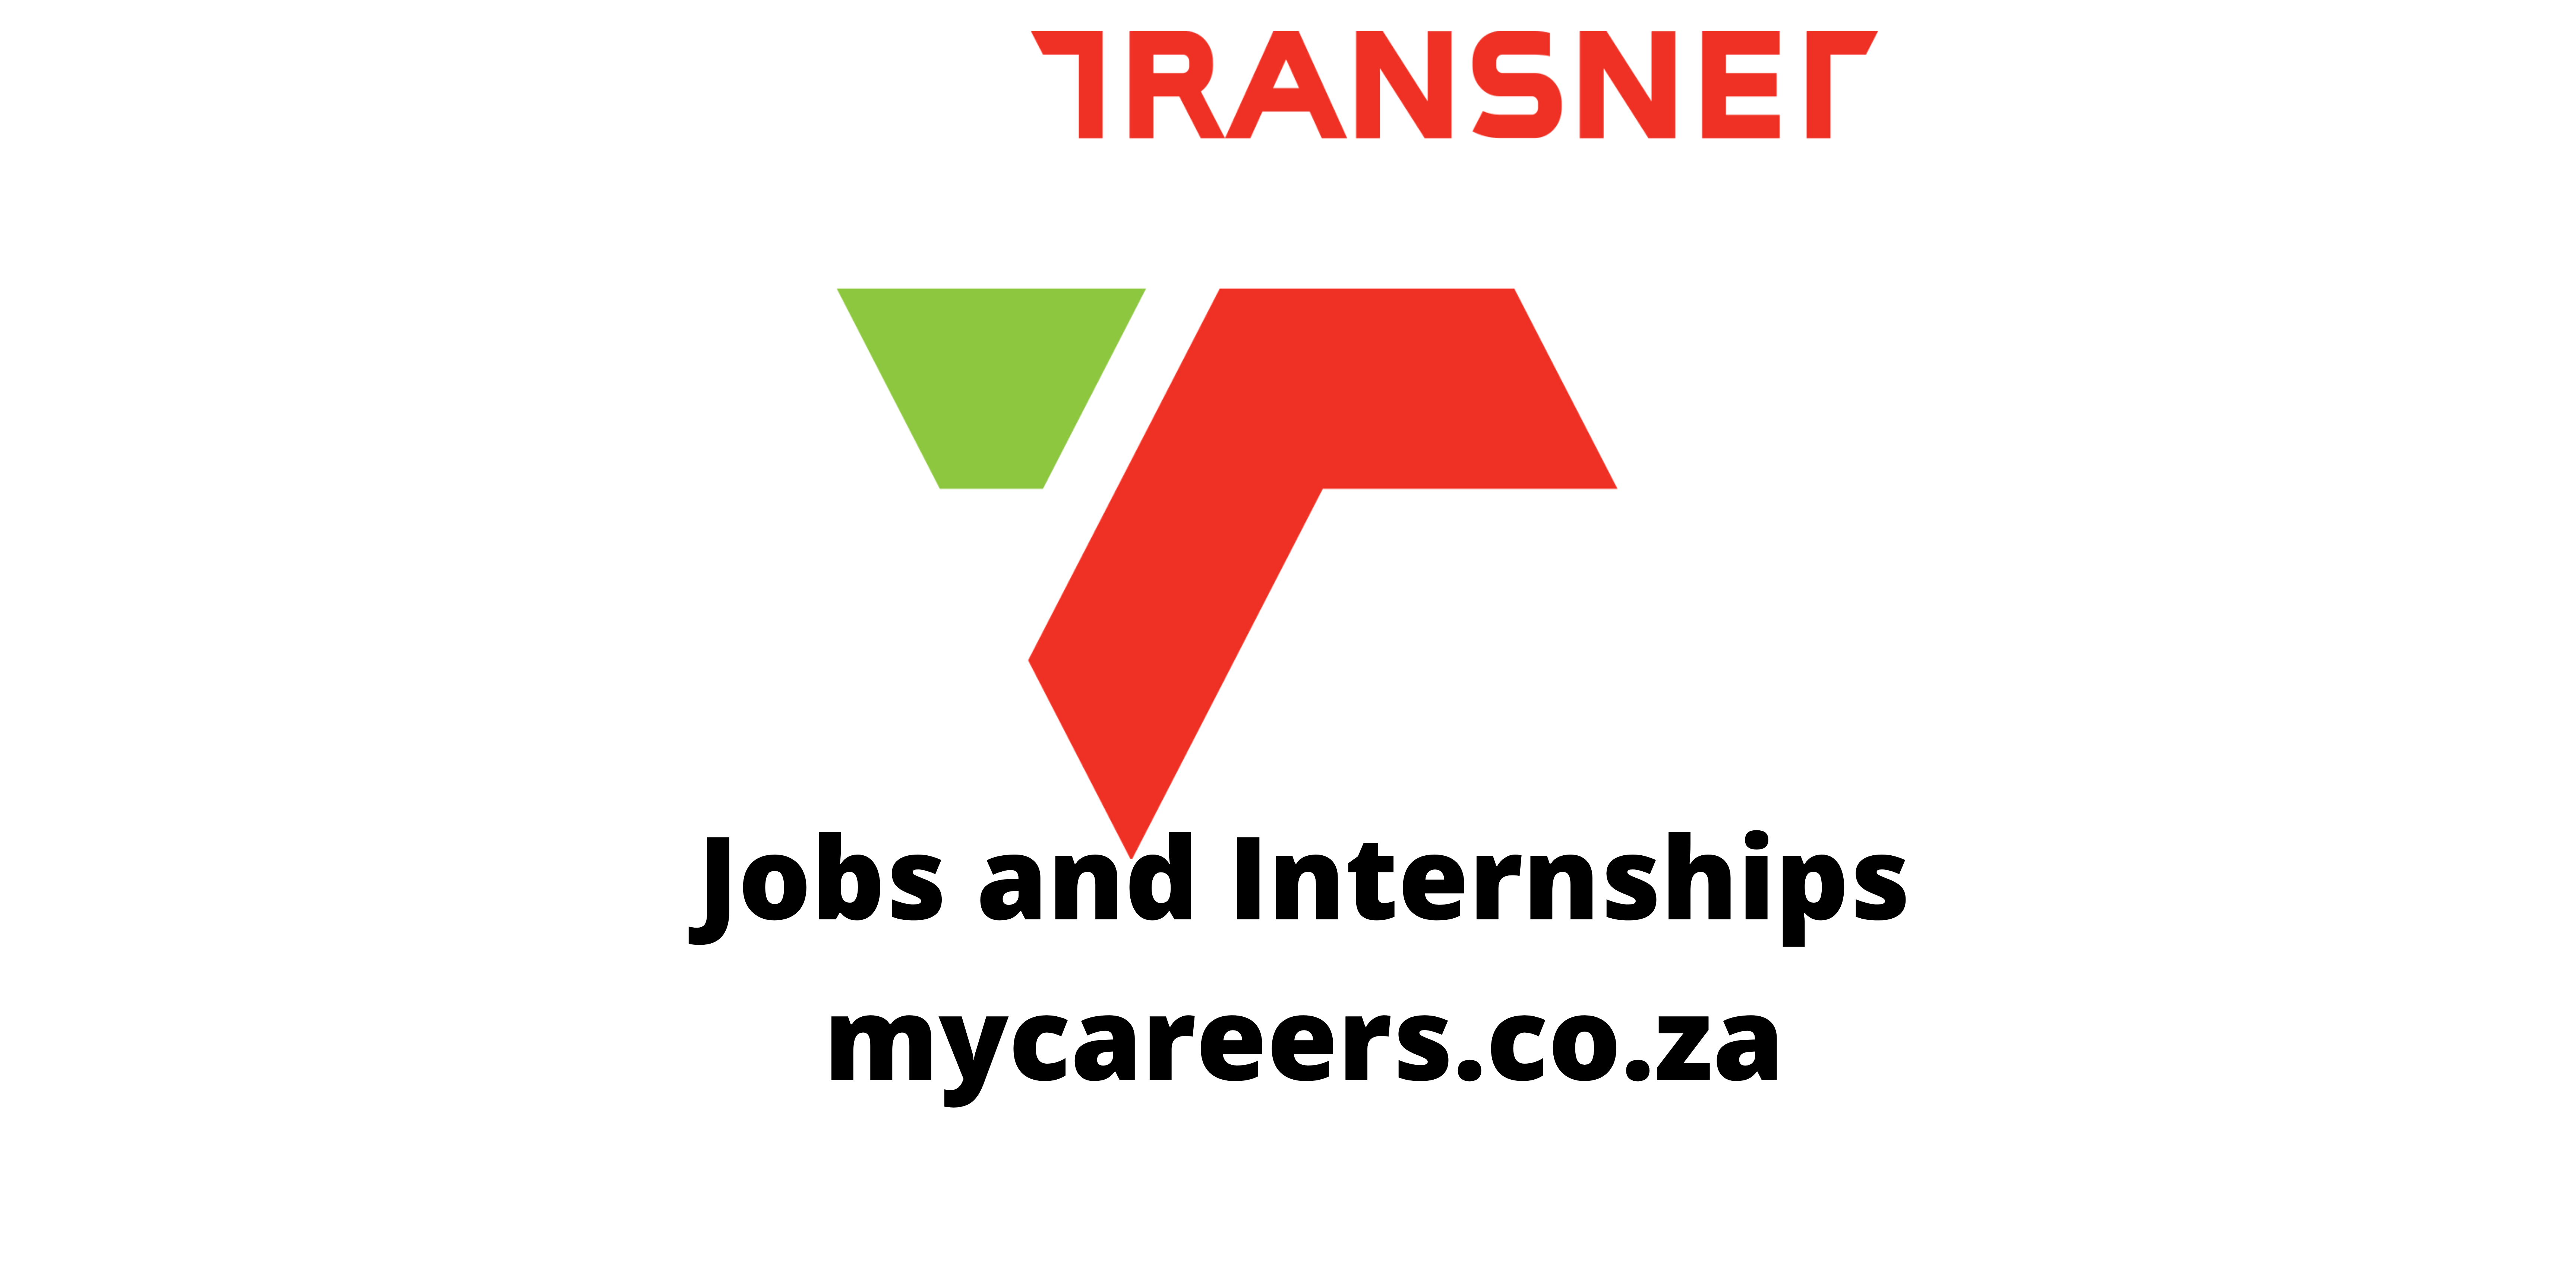 How to Apply Transnet Jobs and Leanerships